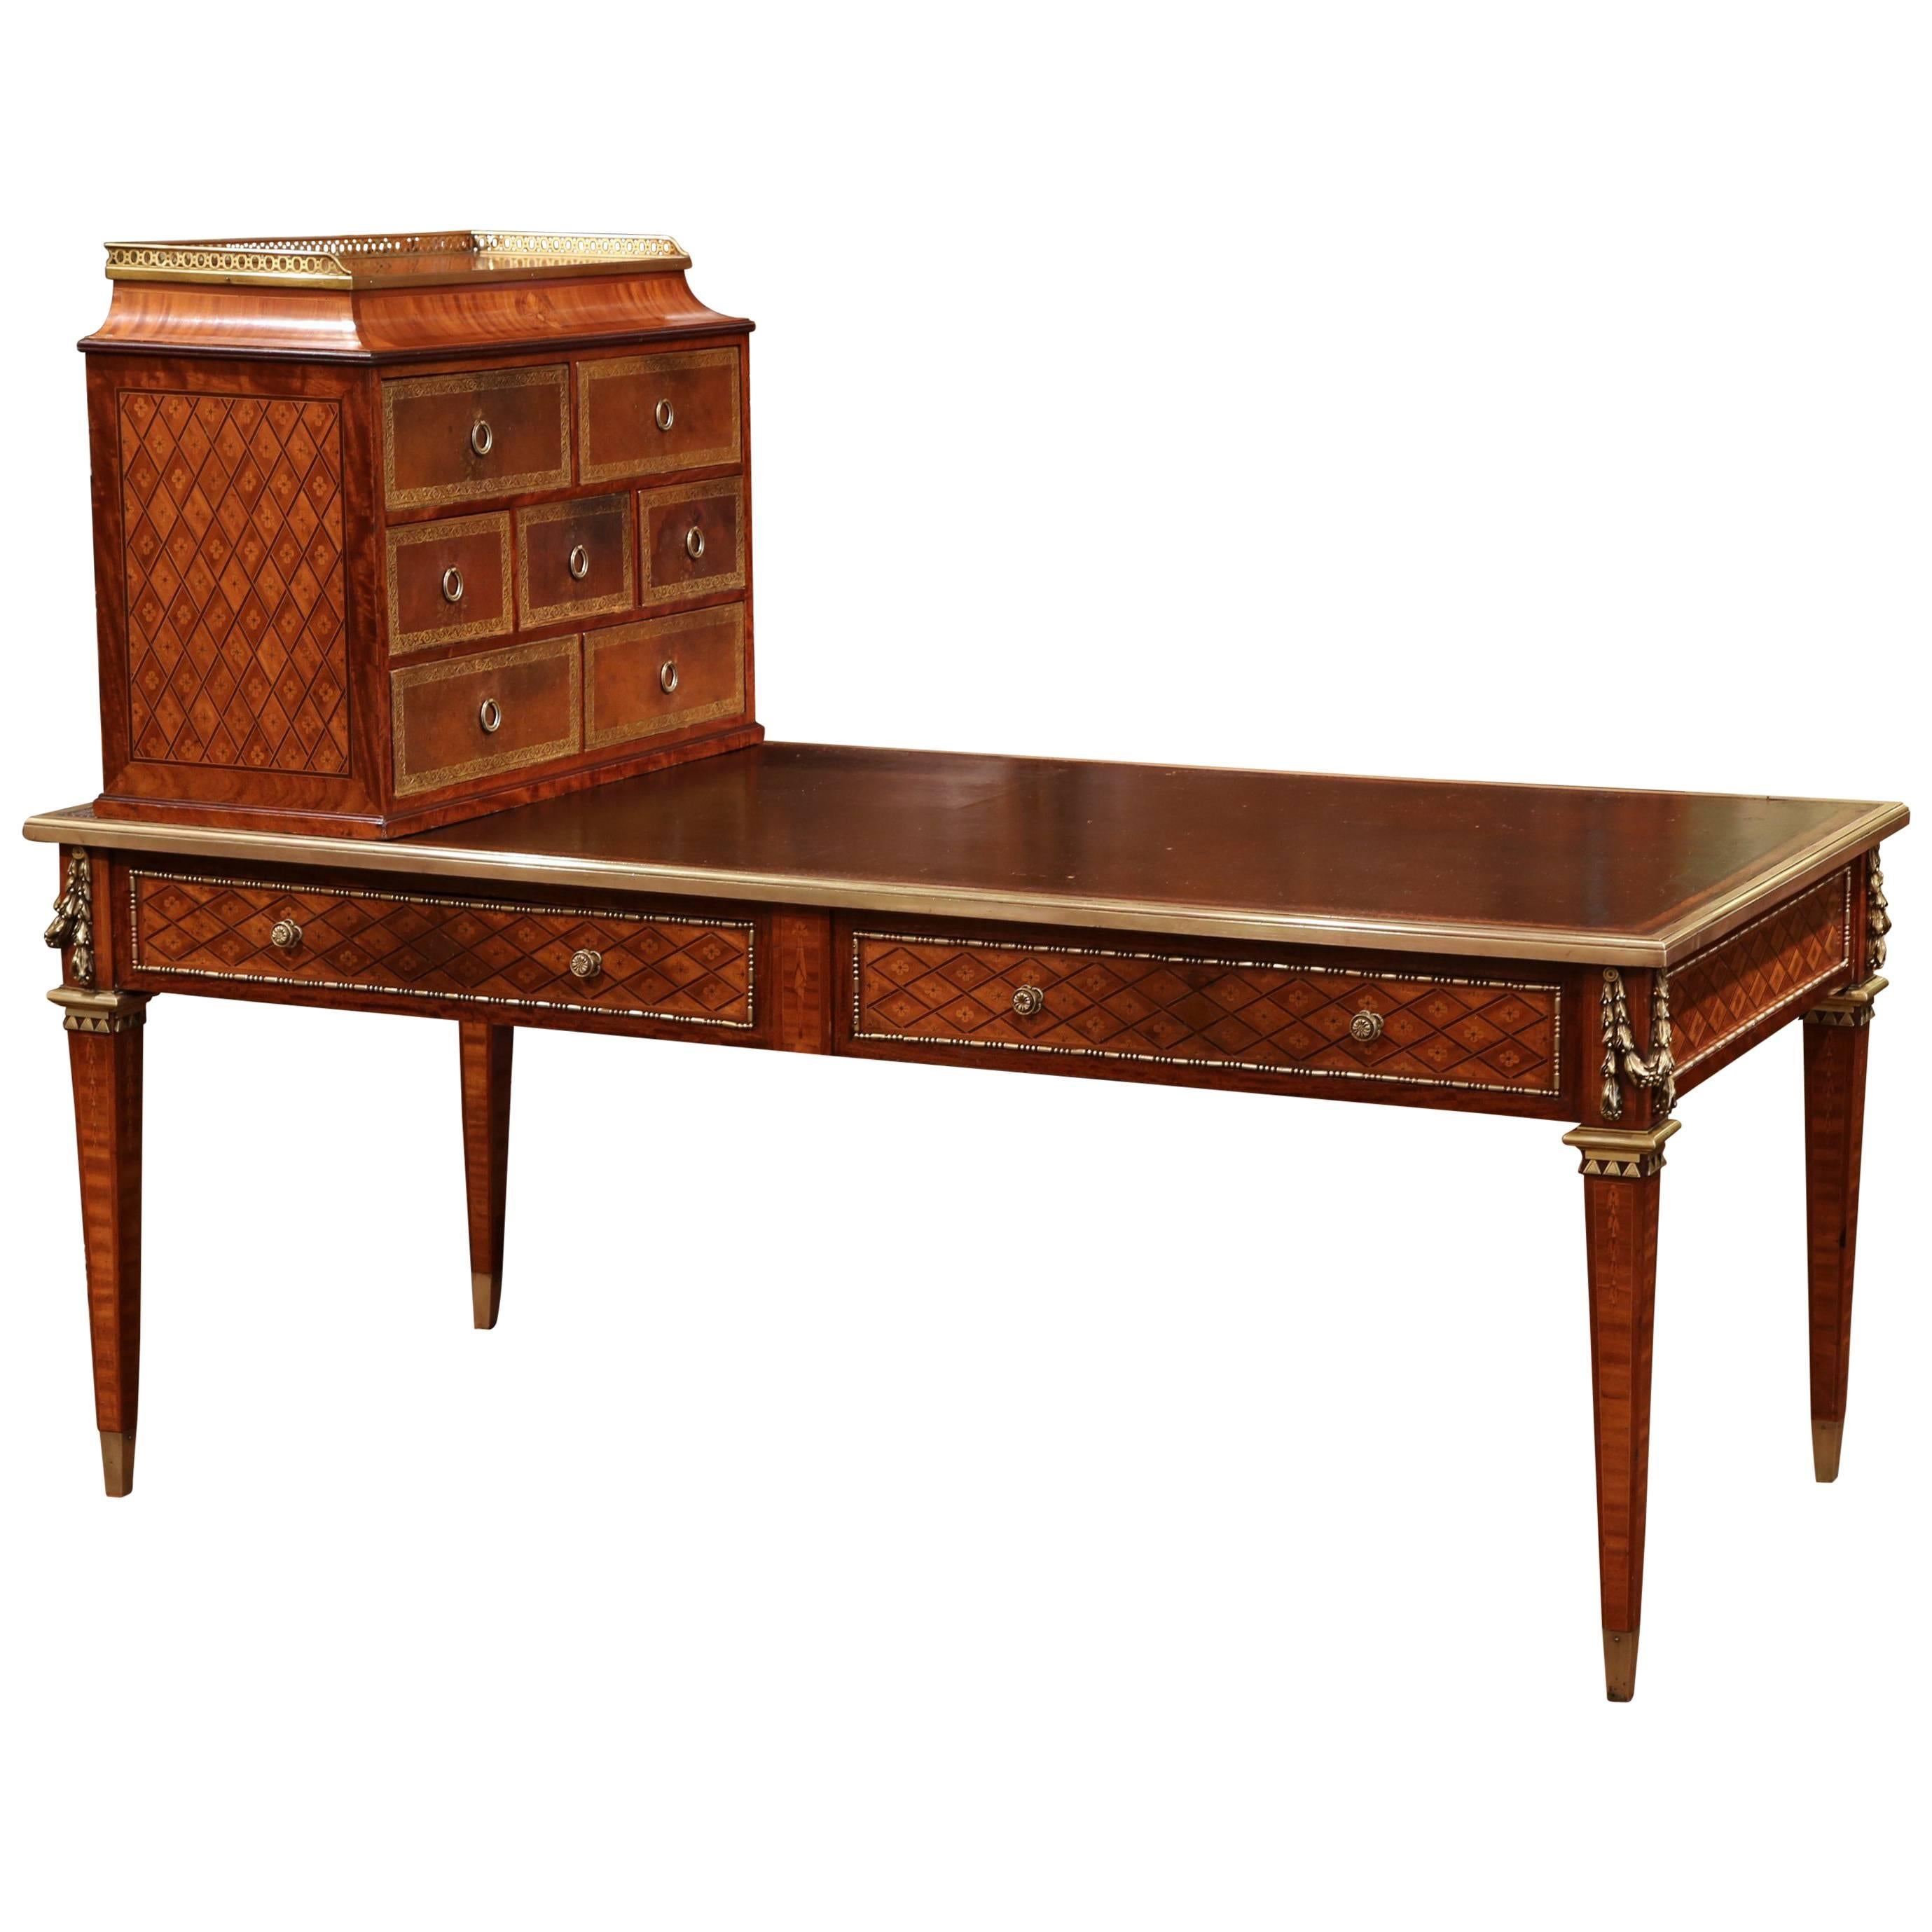 19th Century French Louis XVI Writing Desk with Black Leather Top and Cartonnier